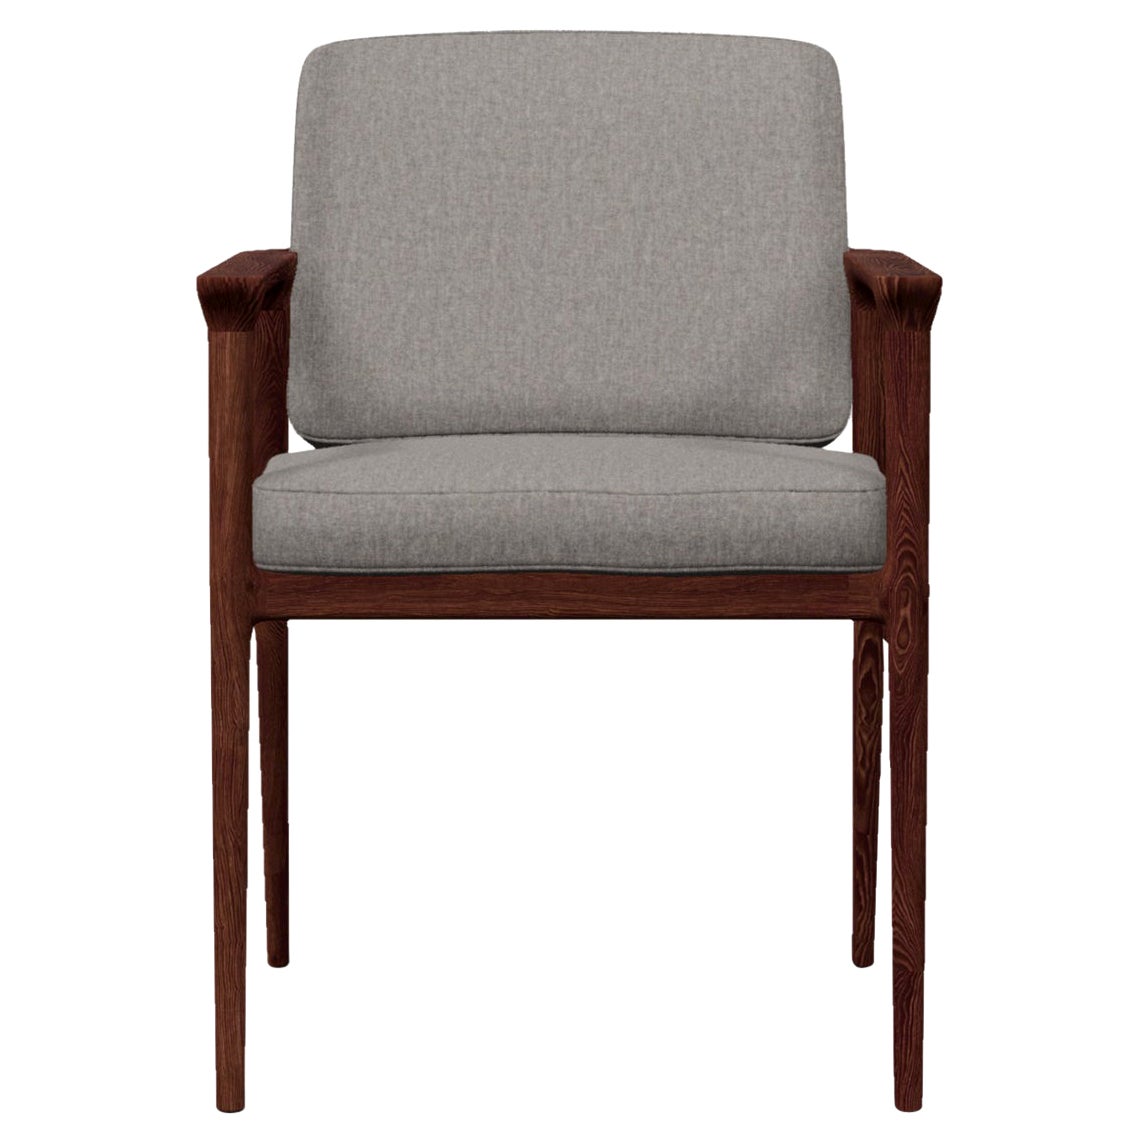 Moooi Zio Dining Chair in Vesper Aluminum Seat with Oak Stained Cinnamon Frame For Sale